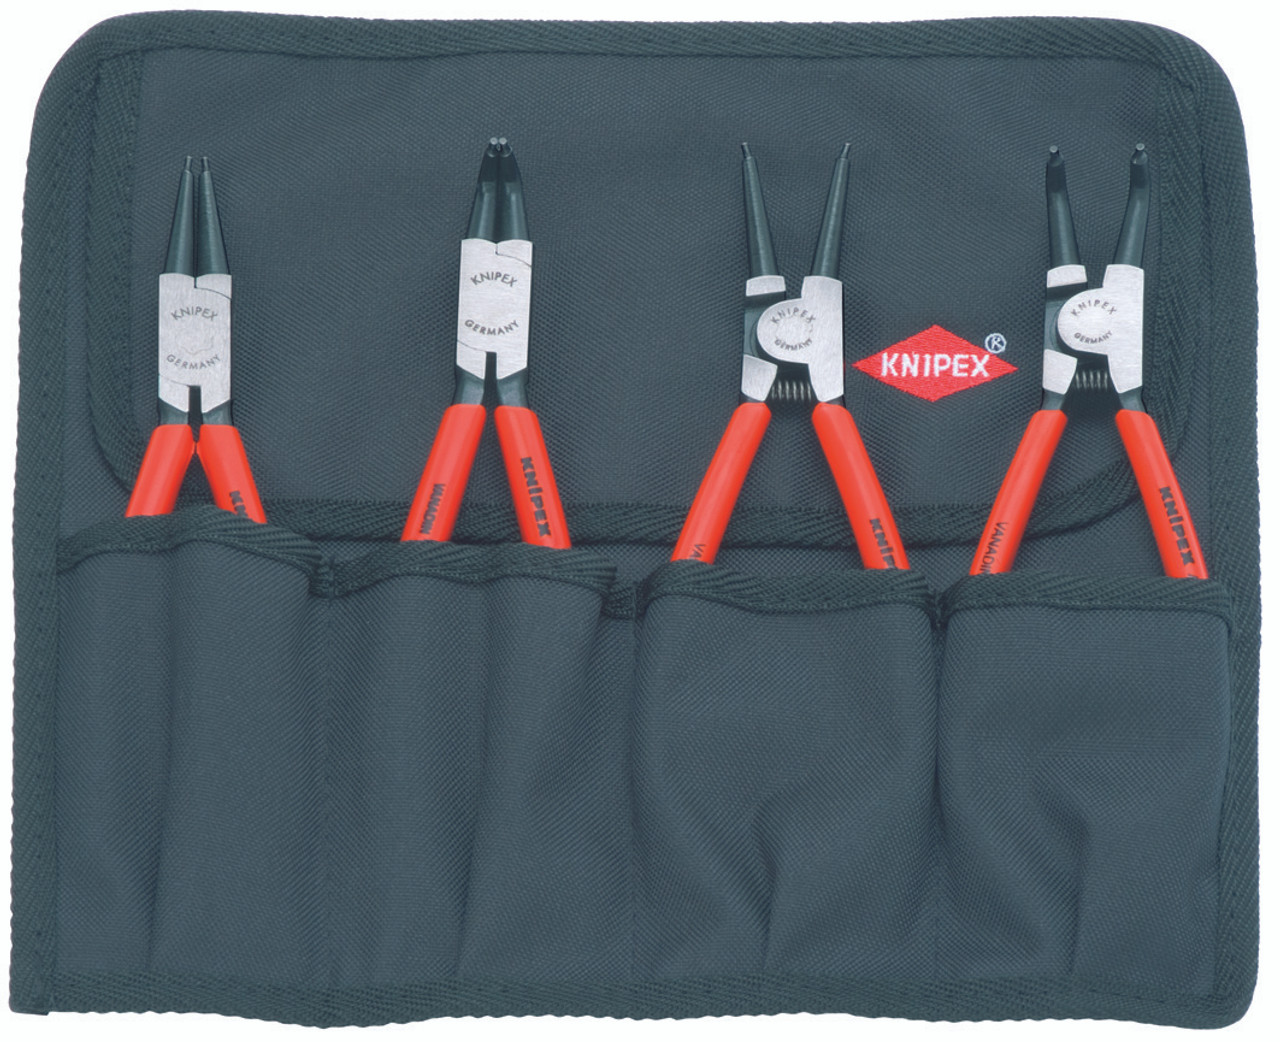 Knipex Special Retaining Ring Pliers Angled for retaining rings on